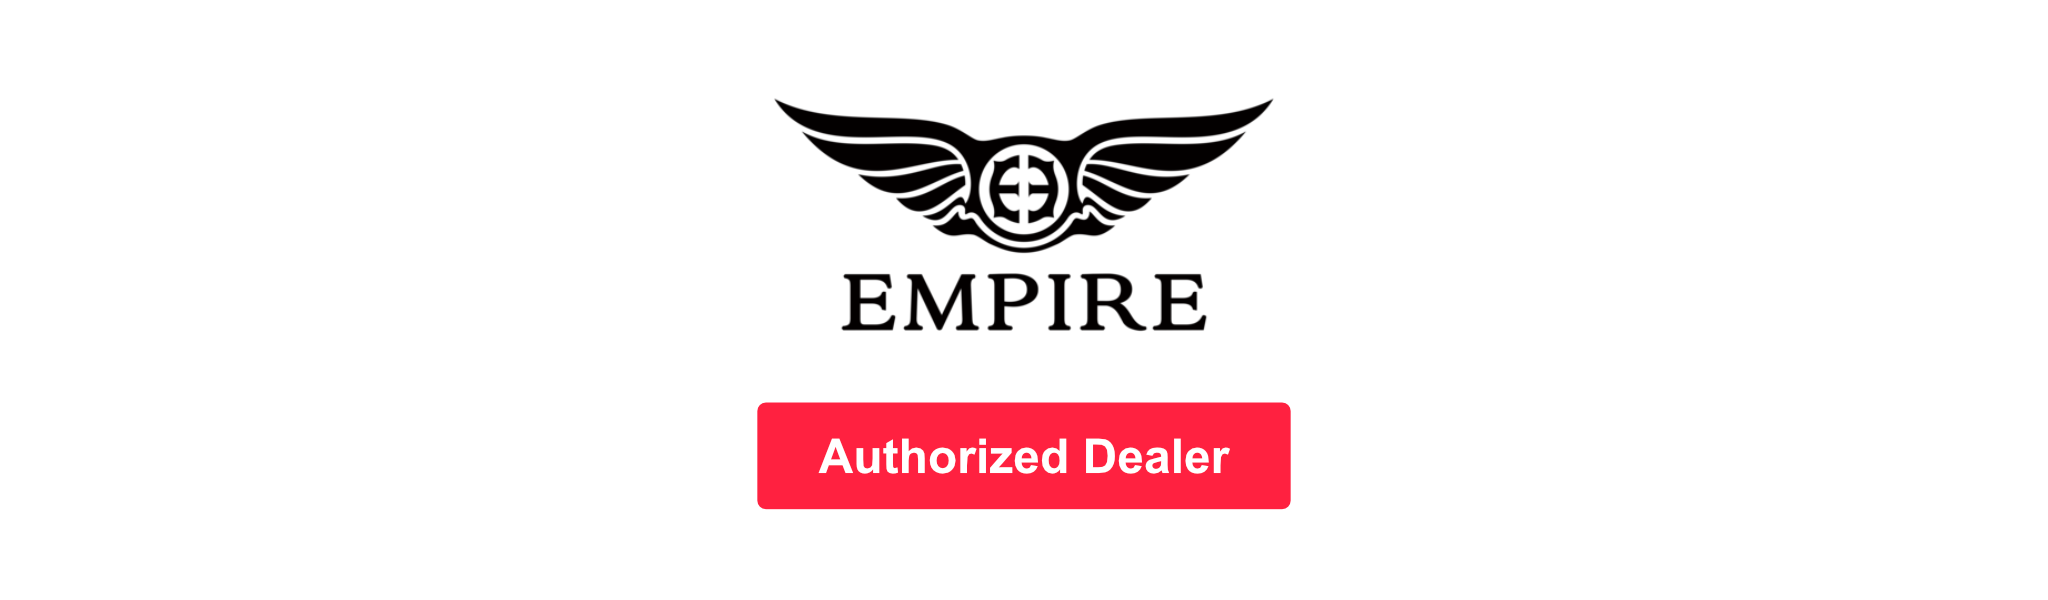 Authorized Dealer of Empire Ears